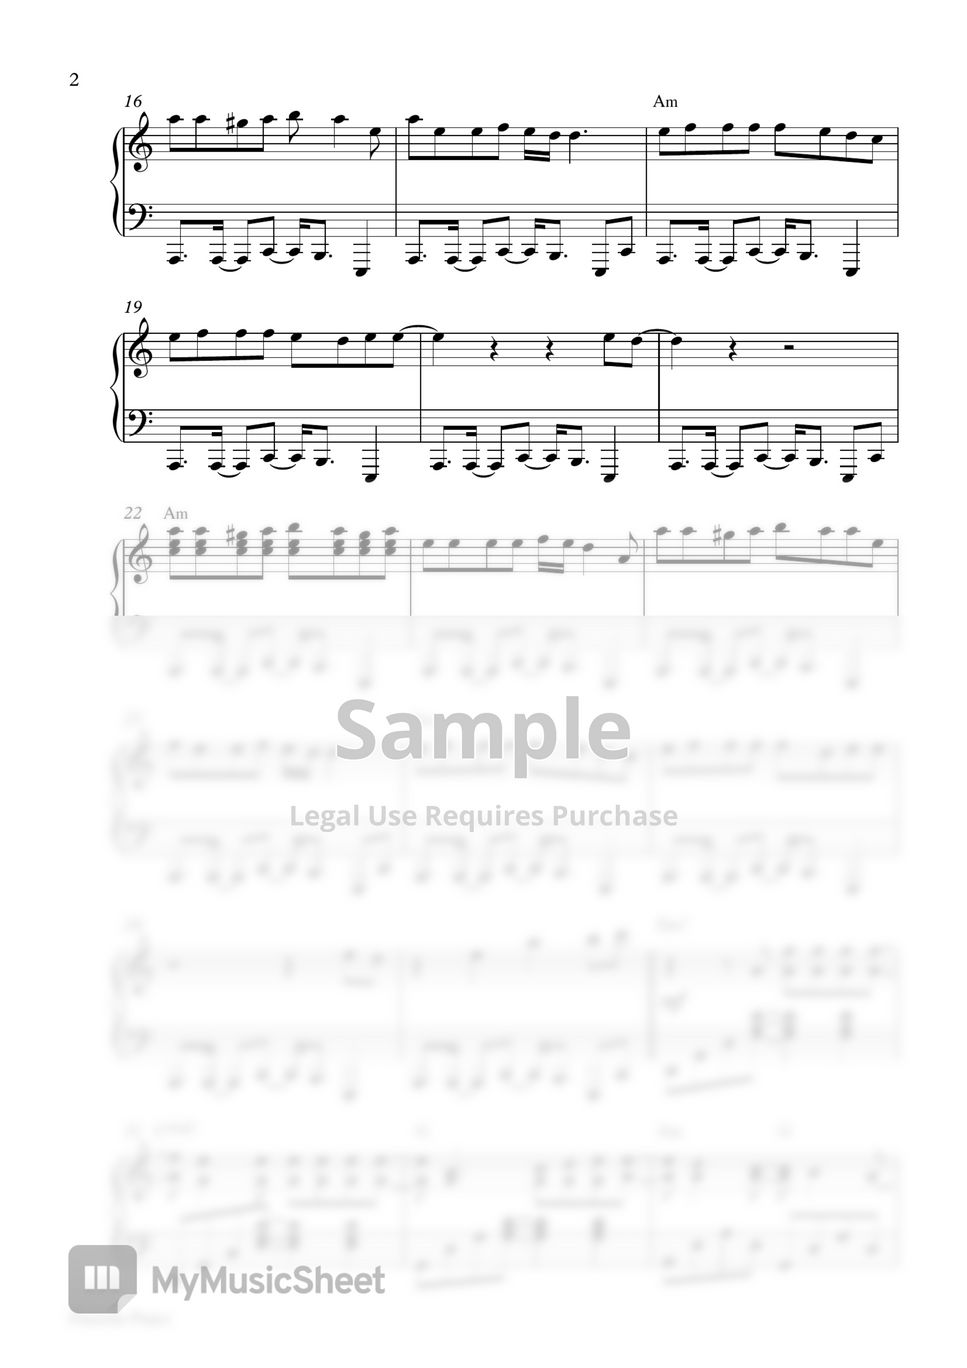 Lady Gaga, BLACKPINK - SOUR CANDY by Pianella Piano (Piano Sheet + Drum Backing Track)